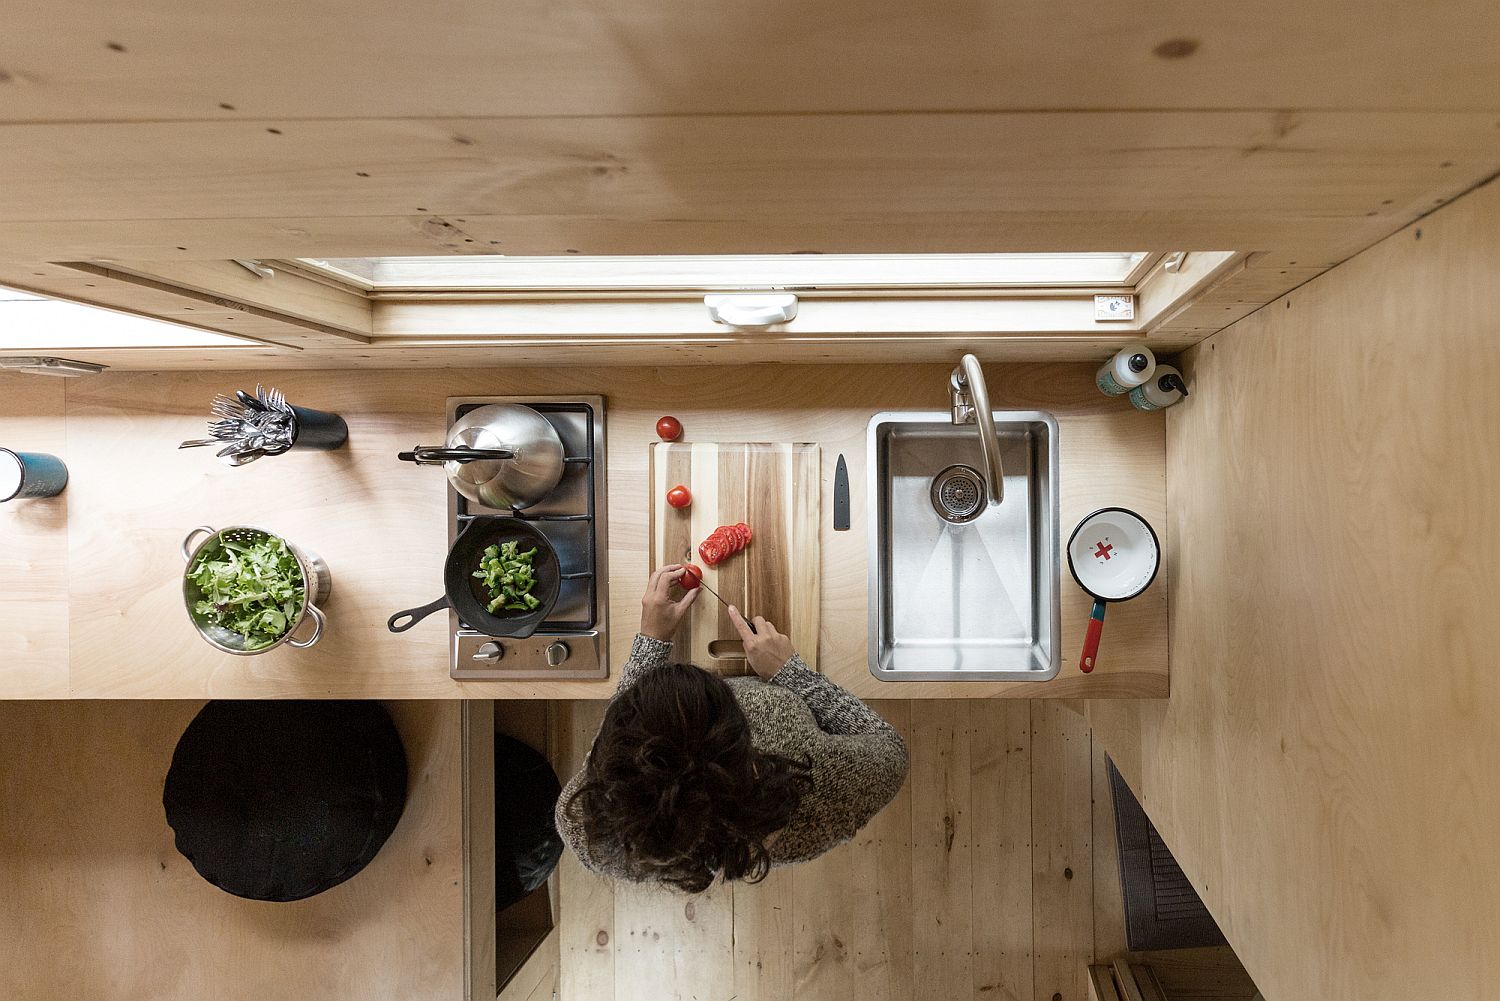 View-of-the-multi-functioning-kitchen-area-from-above